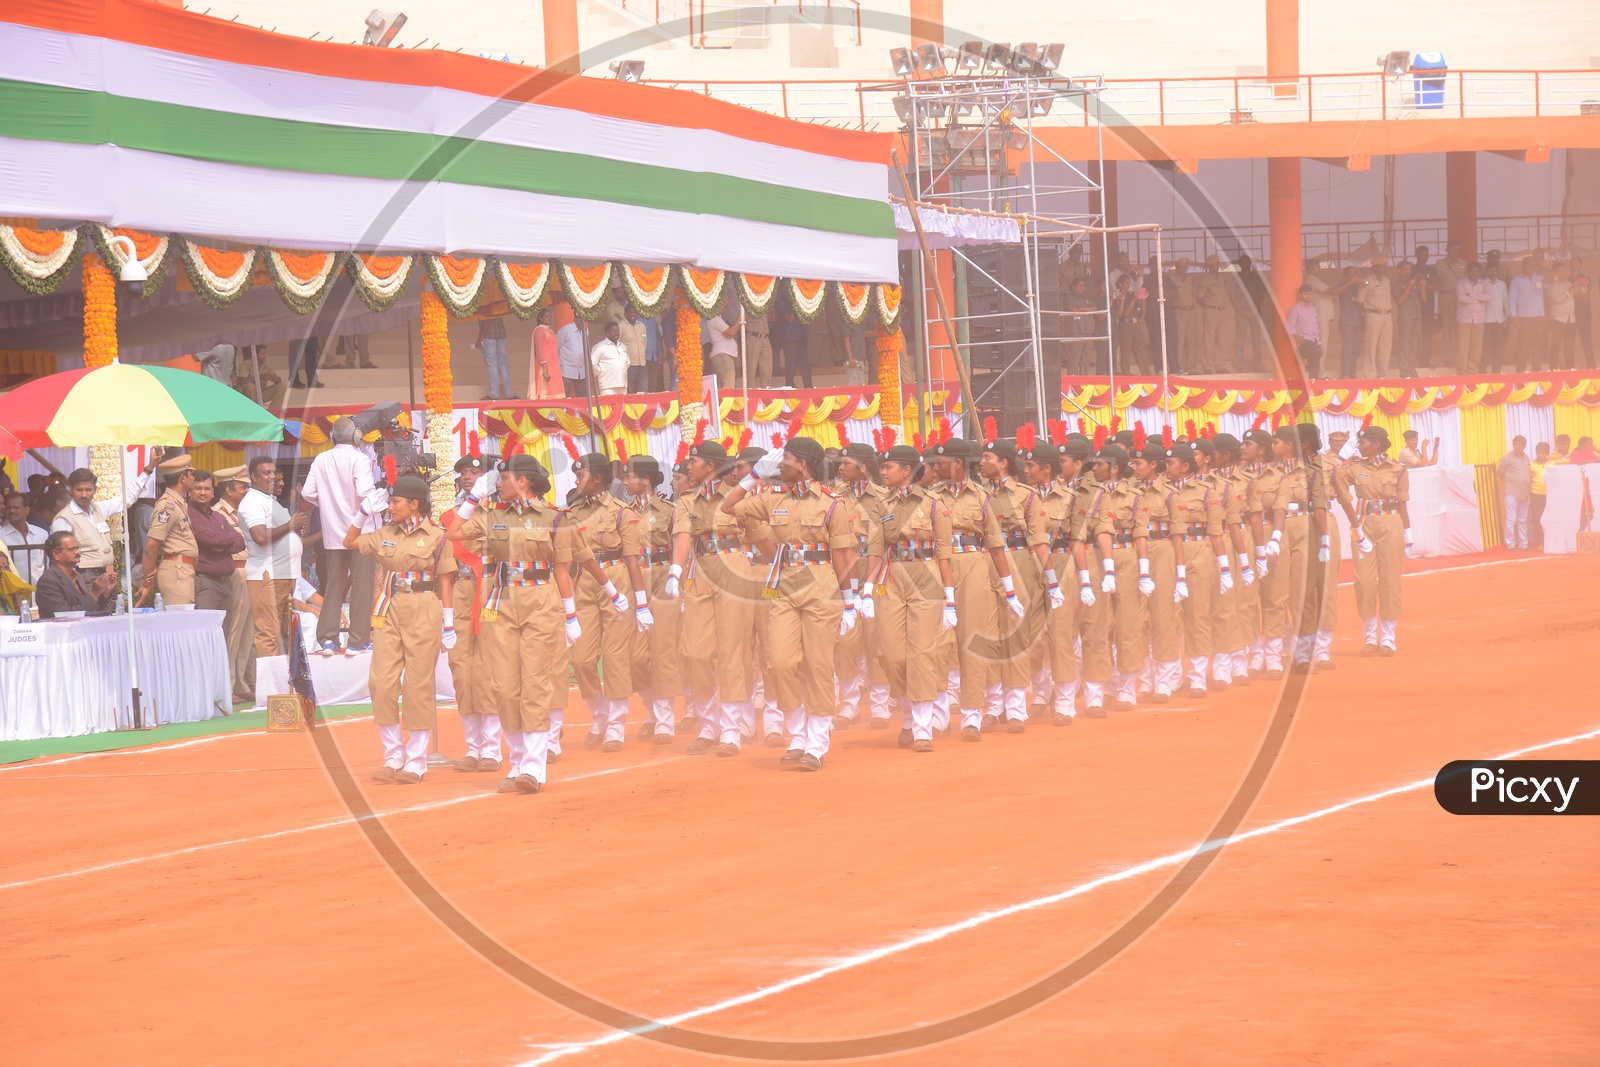 Republic Day Celebrations - Parade by women police battalion in the stadium ground